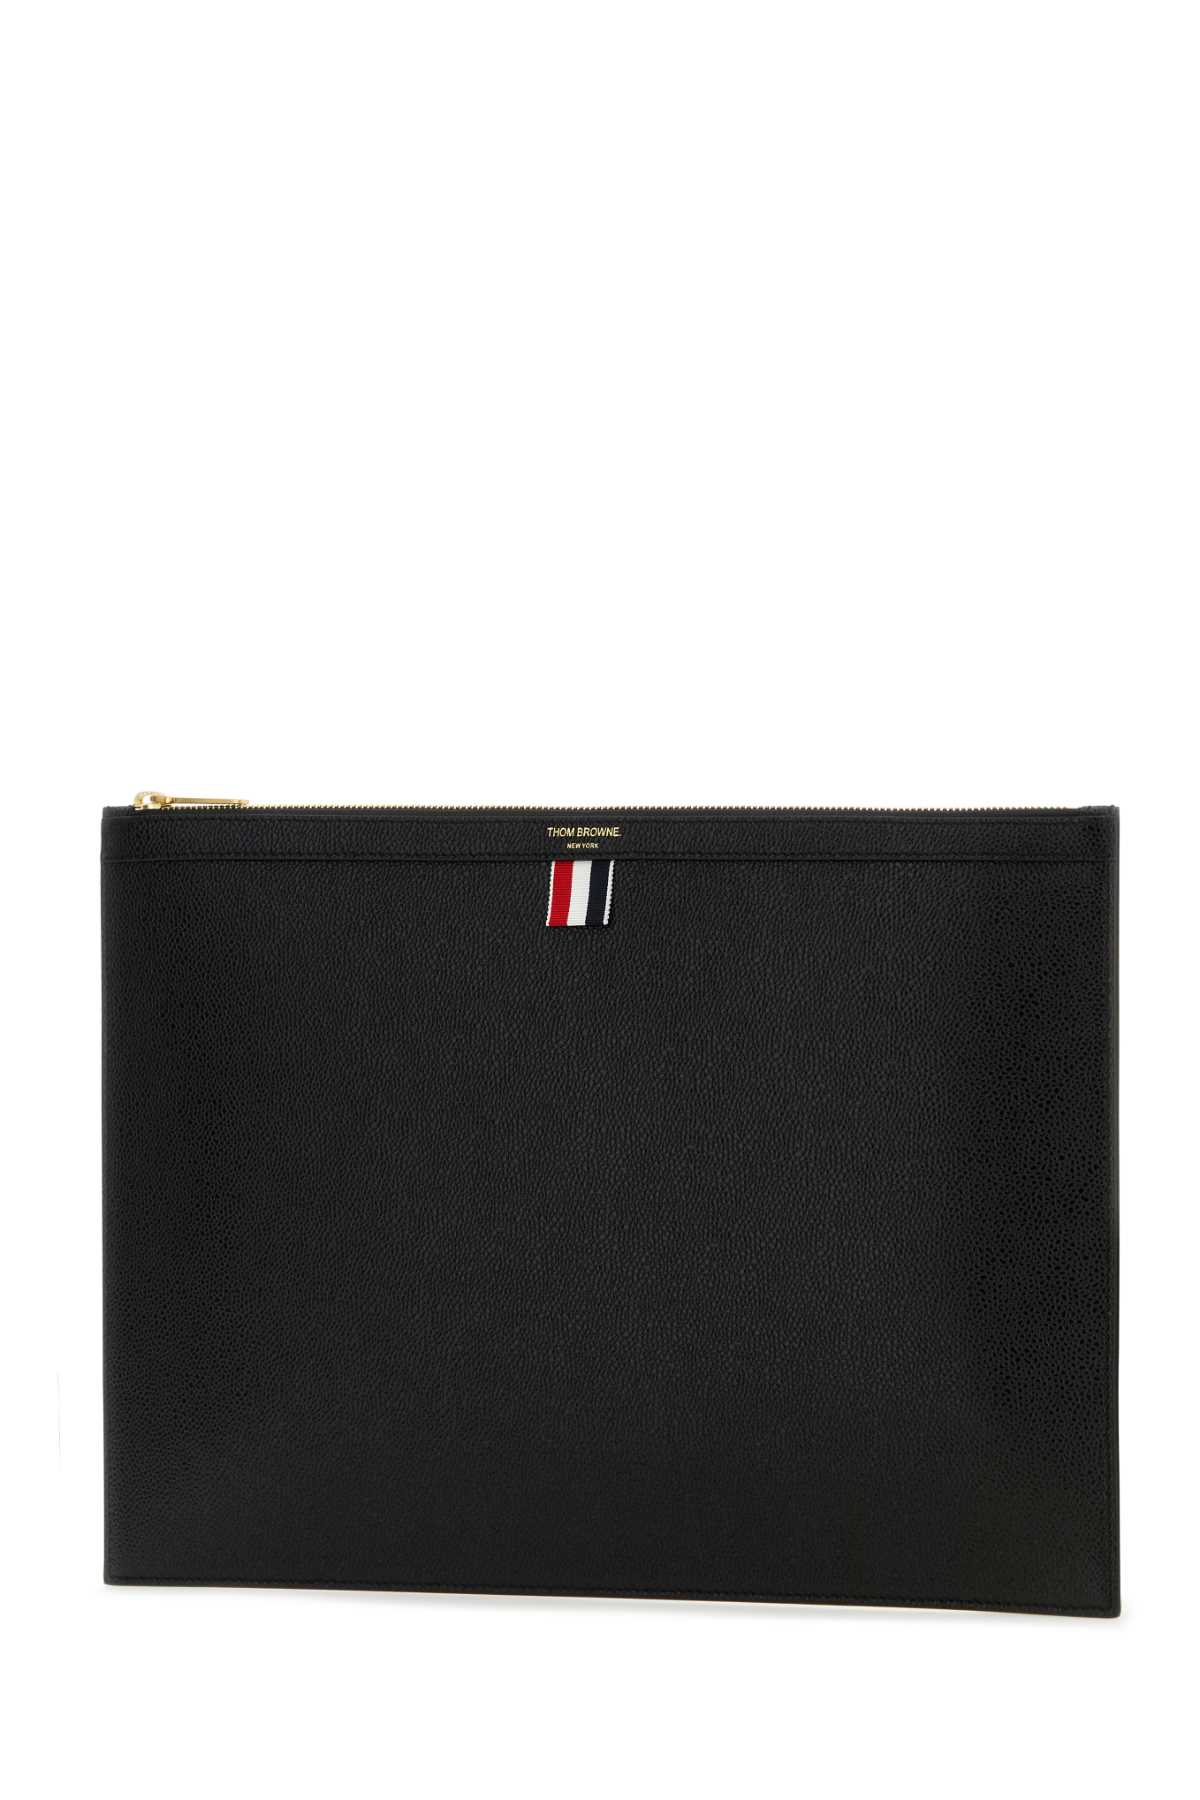 Thom Browne Black Leather Document Case In 001